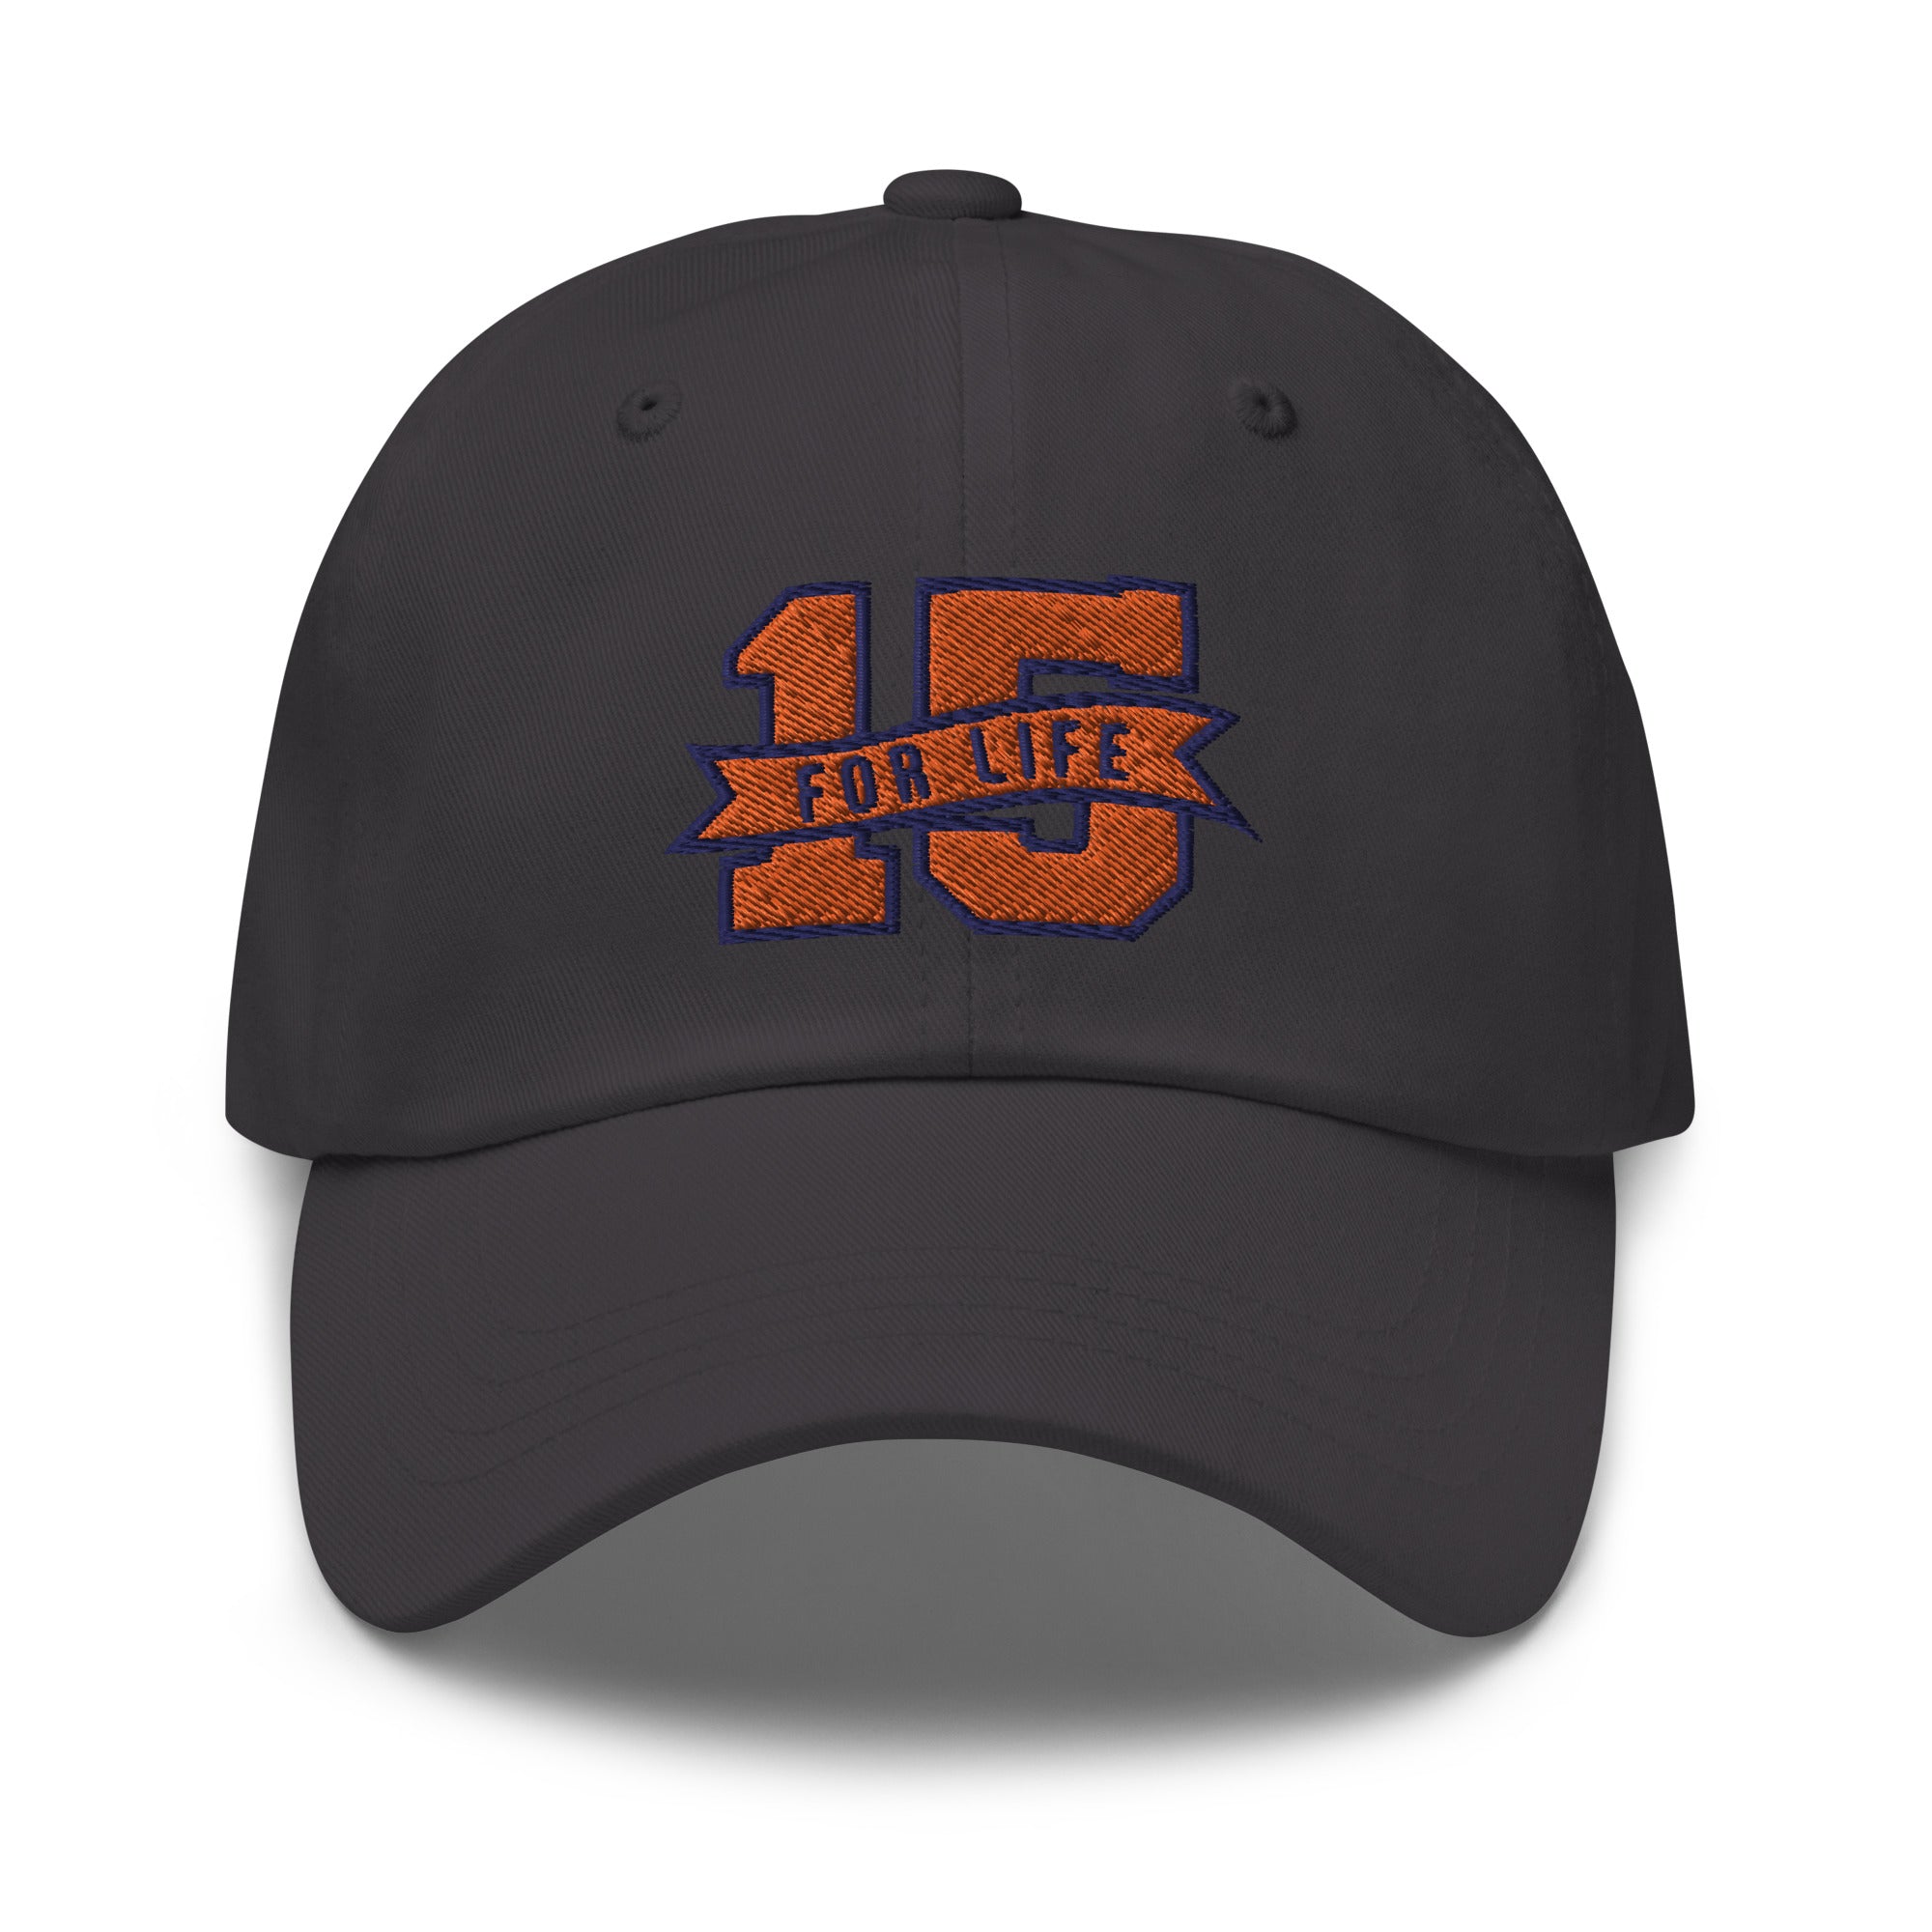 15 For Life Dad hat